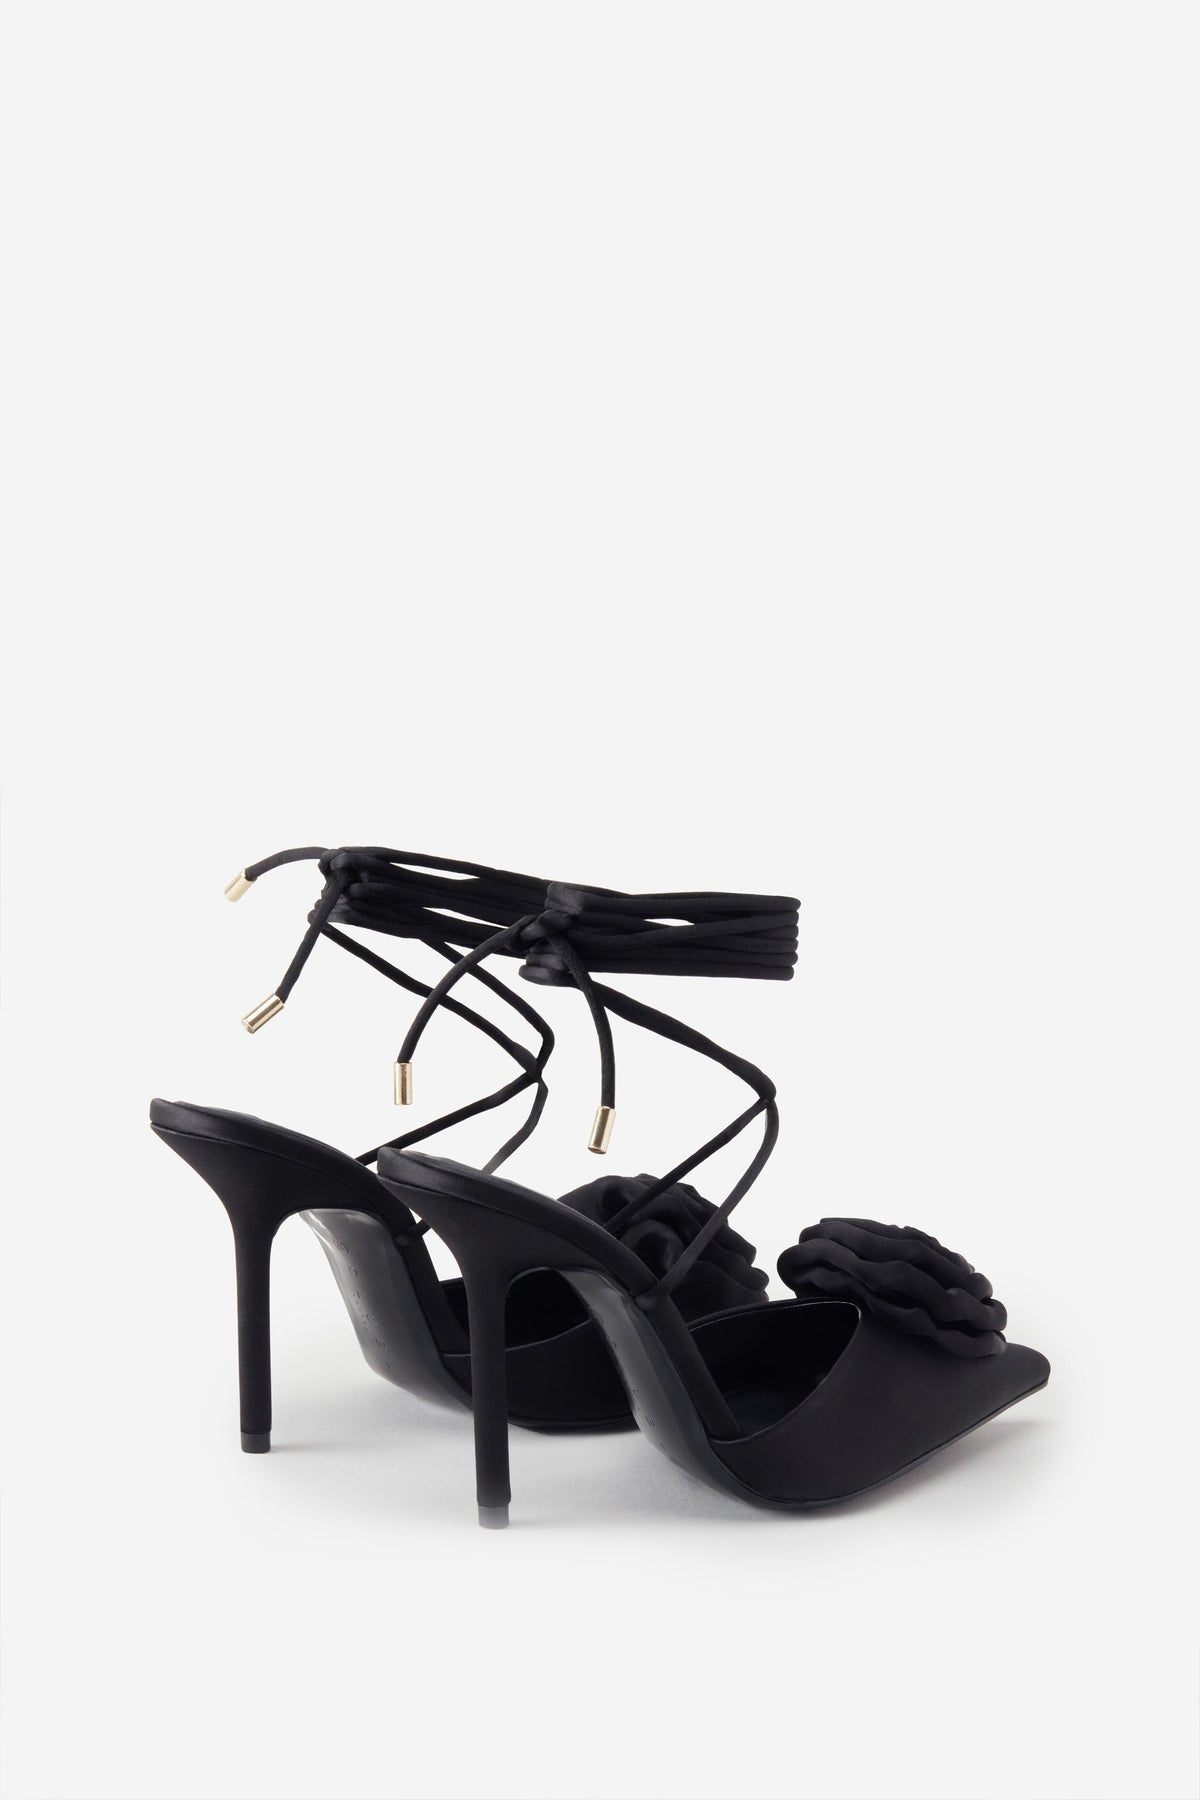 Sexy Lace Up High Heels Peep Toe Sandals In Black And White on Luulla